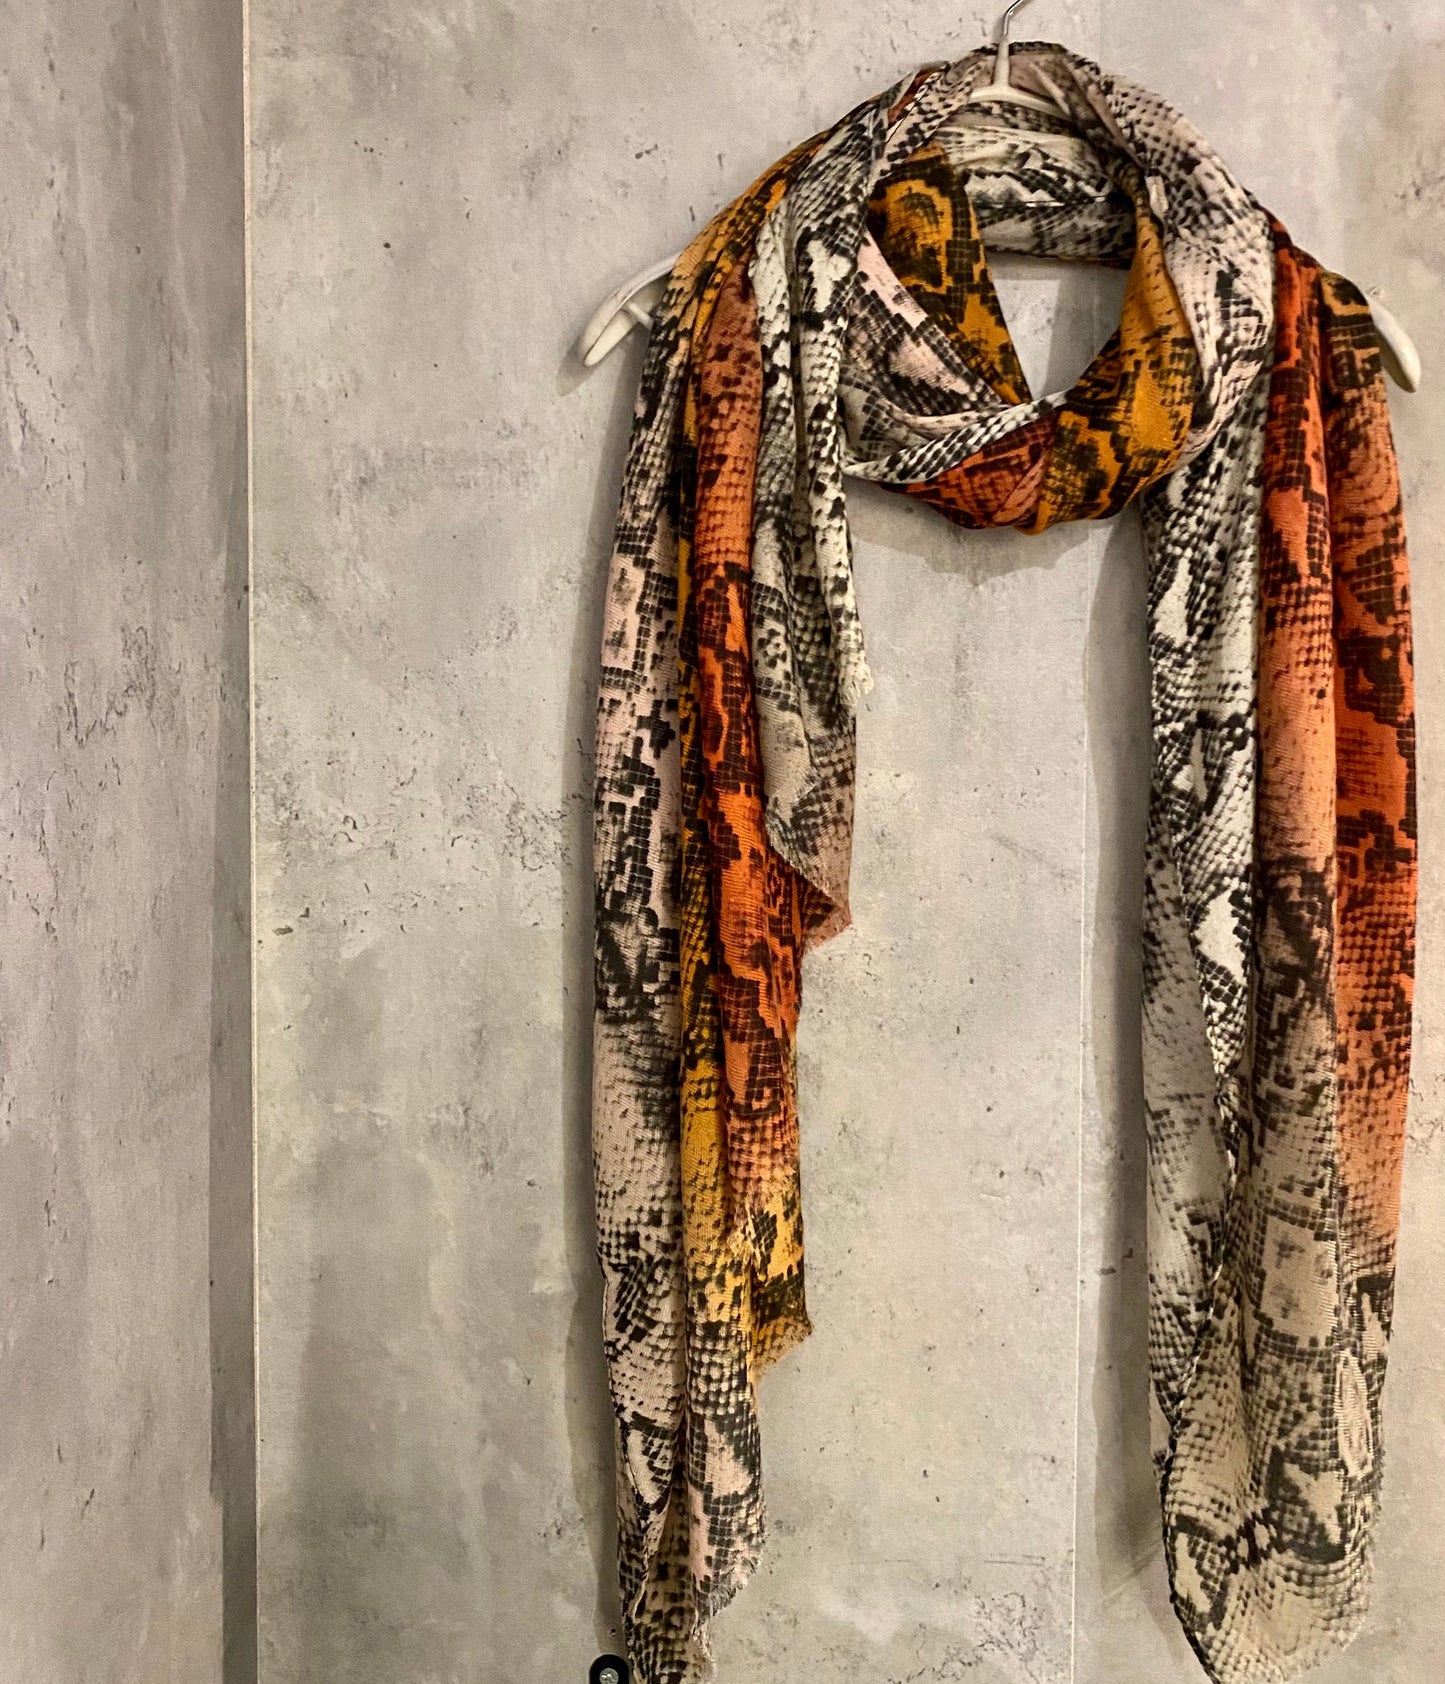 Two Toned Python Pattern Orange Beige Cotton Scarf/Autumn Winter Scarf/Gifts For Mom/Gifts For Her Birthday Christmas/Scarf Women/UK Seller